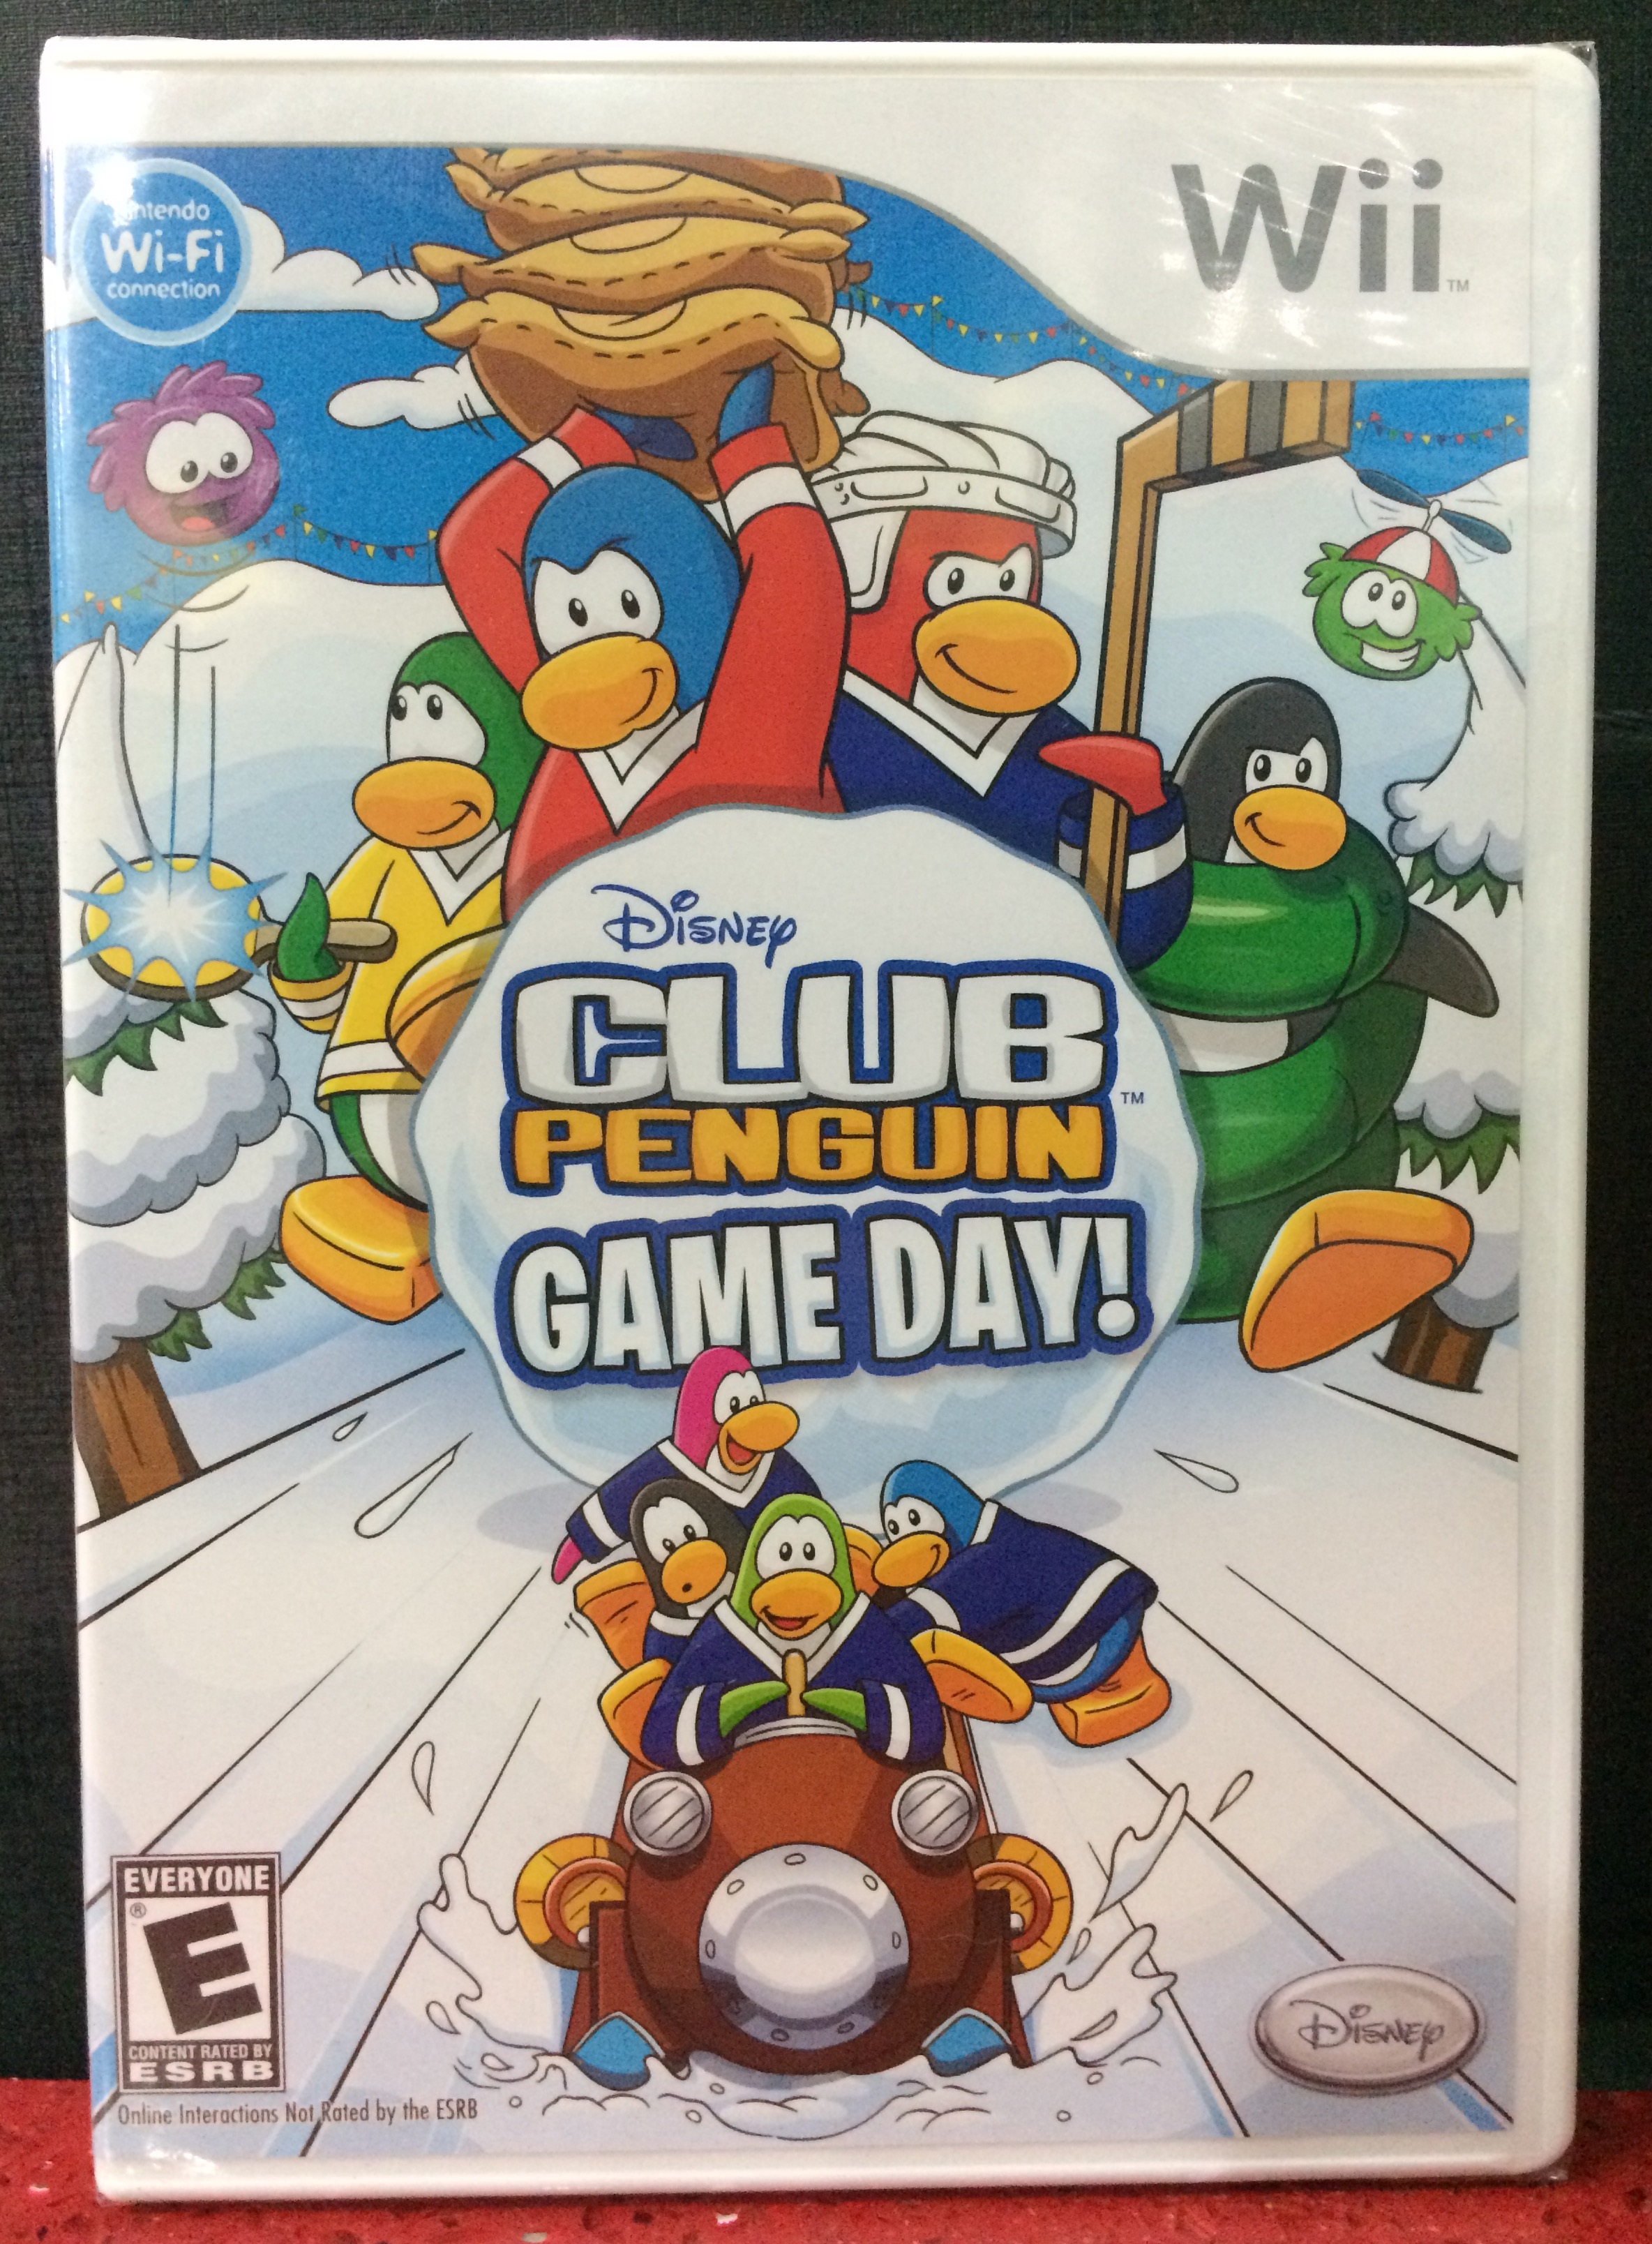 Wii Club Penguin Game Day – GameStation